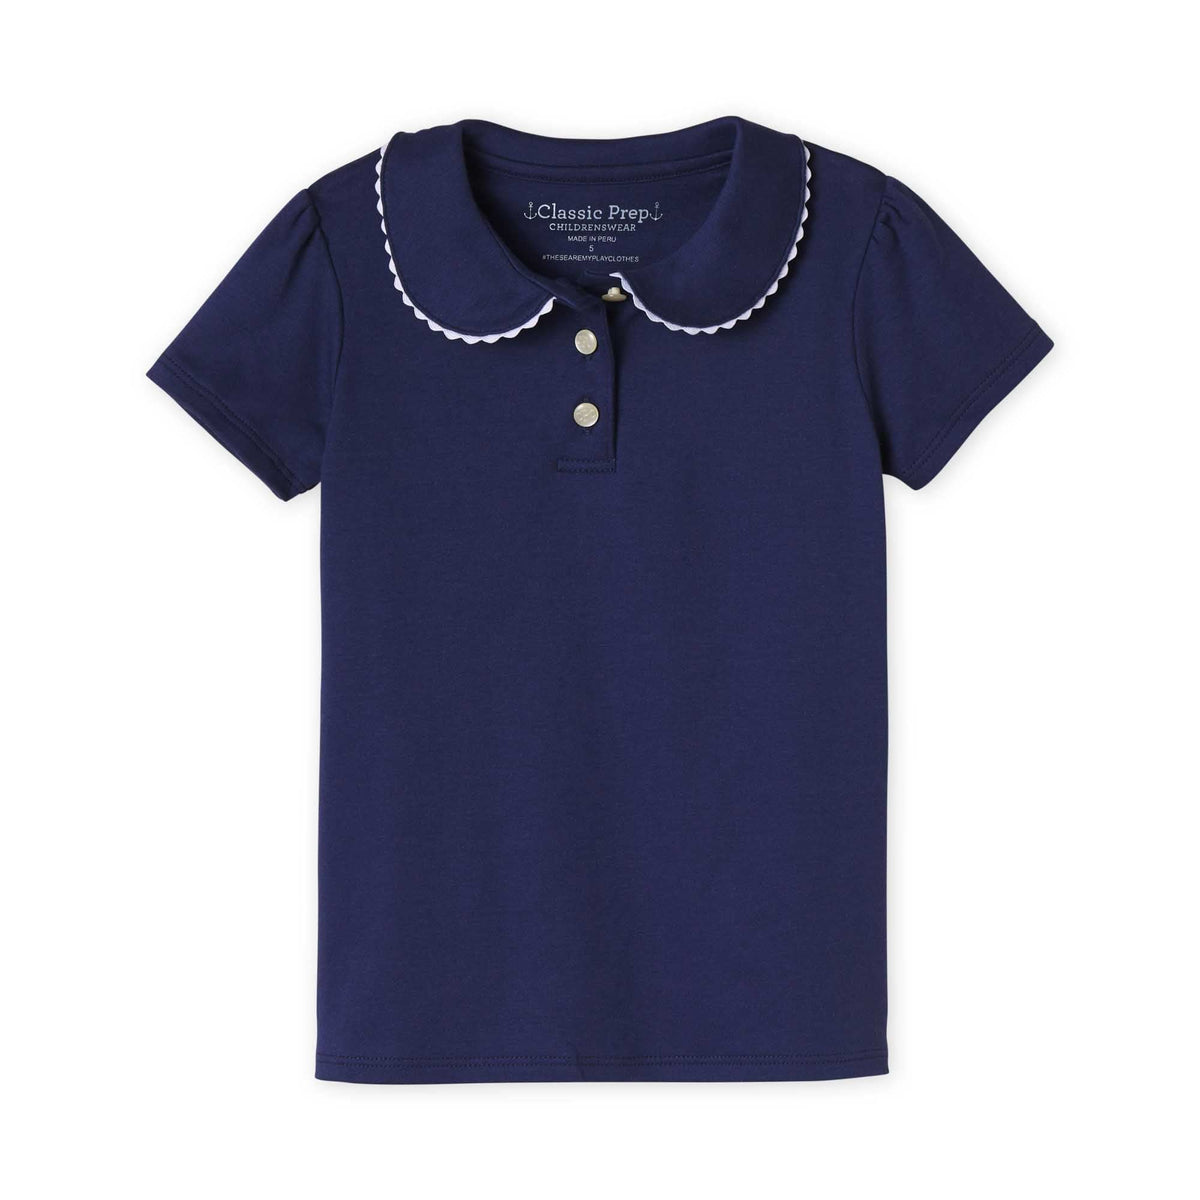 Classic and Preppy Sarah Short Sleeve Polo, Blue Ribbon 2021-Shirts and Tops-Blue Ribbon-12-18M-CPC - Classic Prep Childrenswear